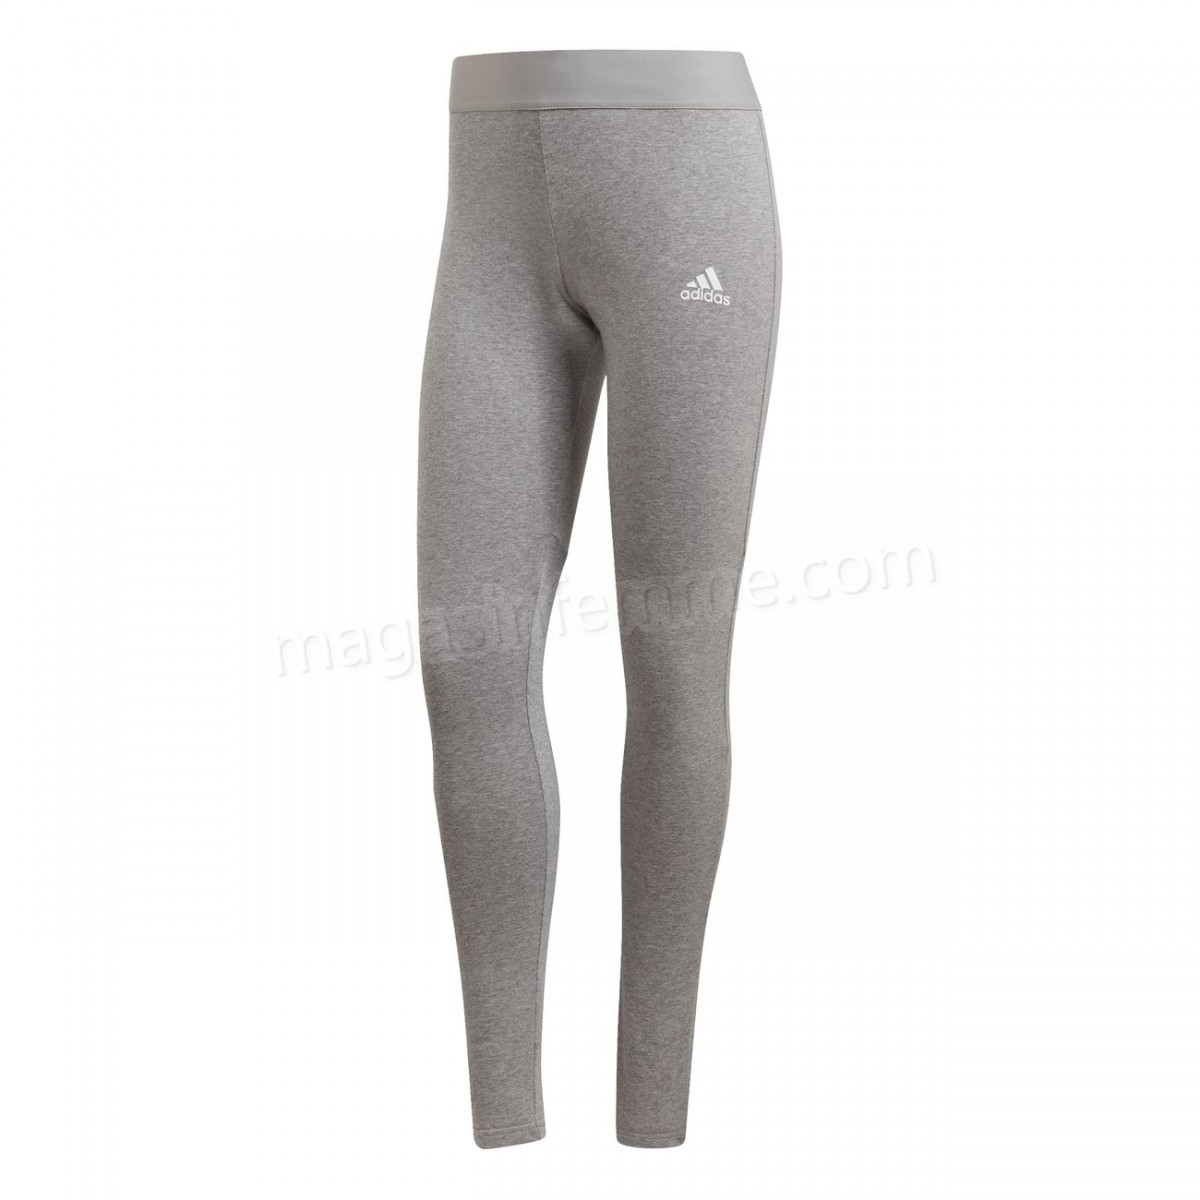 Adidas-Fitness femme ADIDAS Collant femme adidas Must Haves 3-Stripes en solde - -1